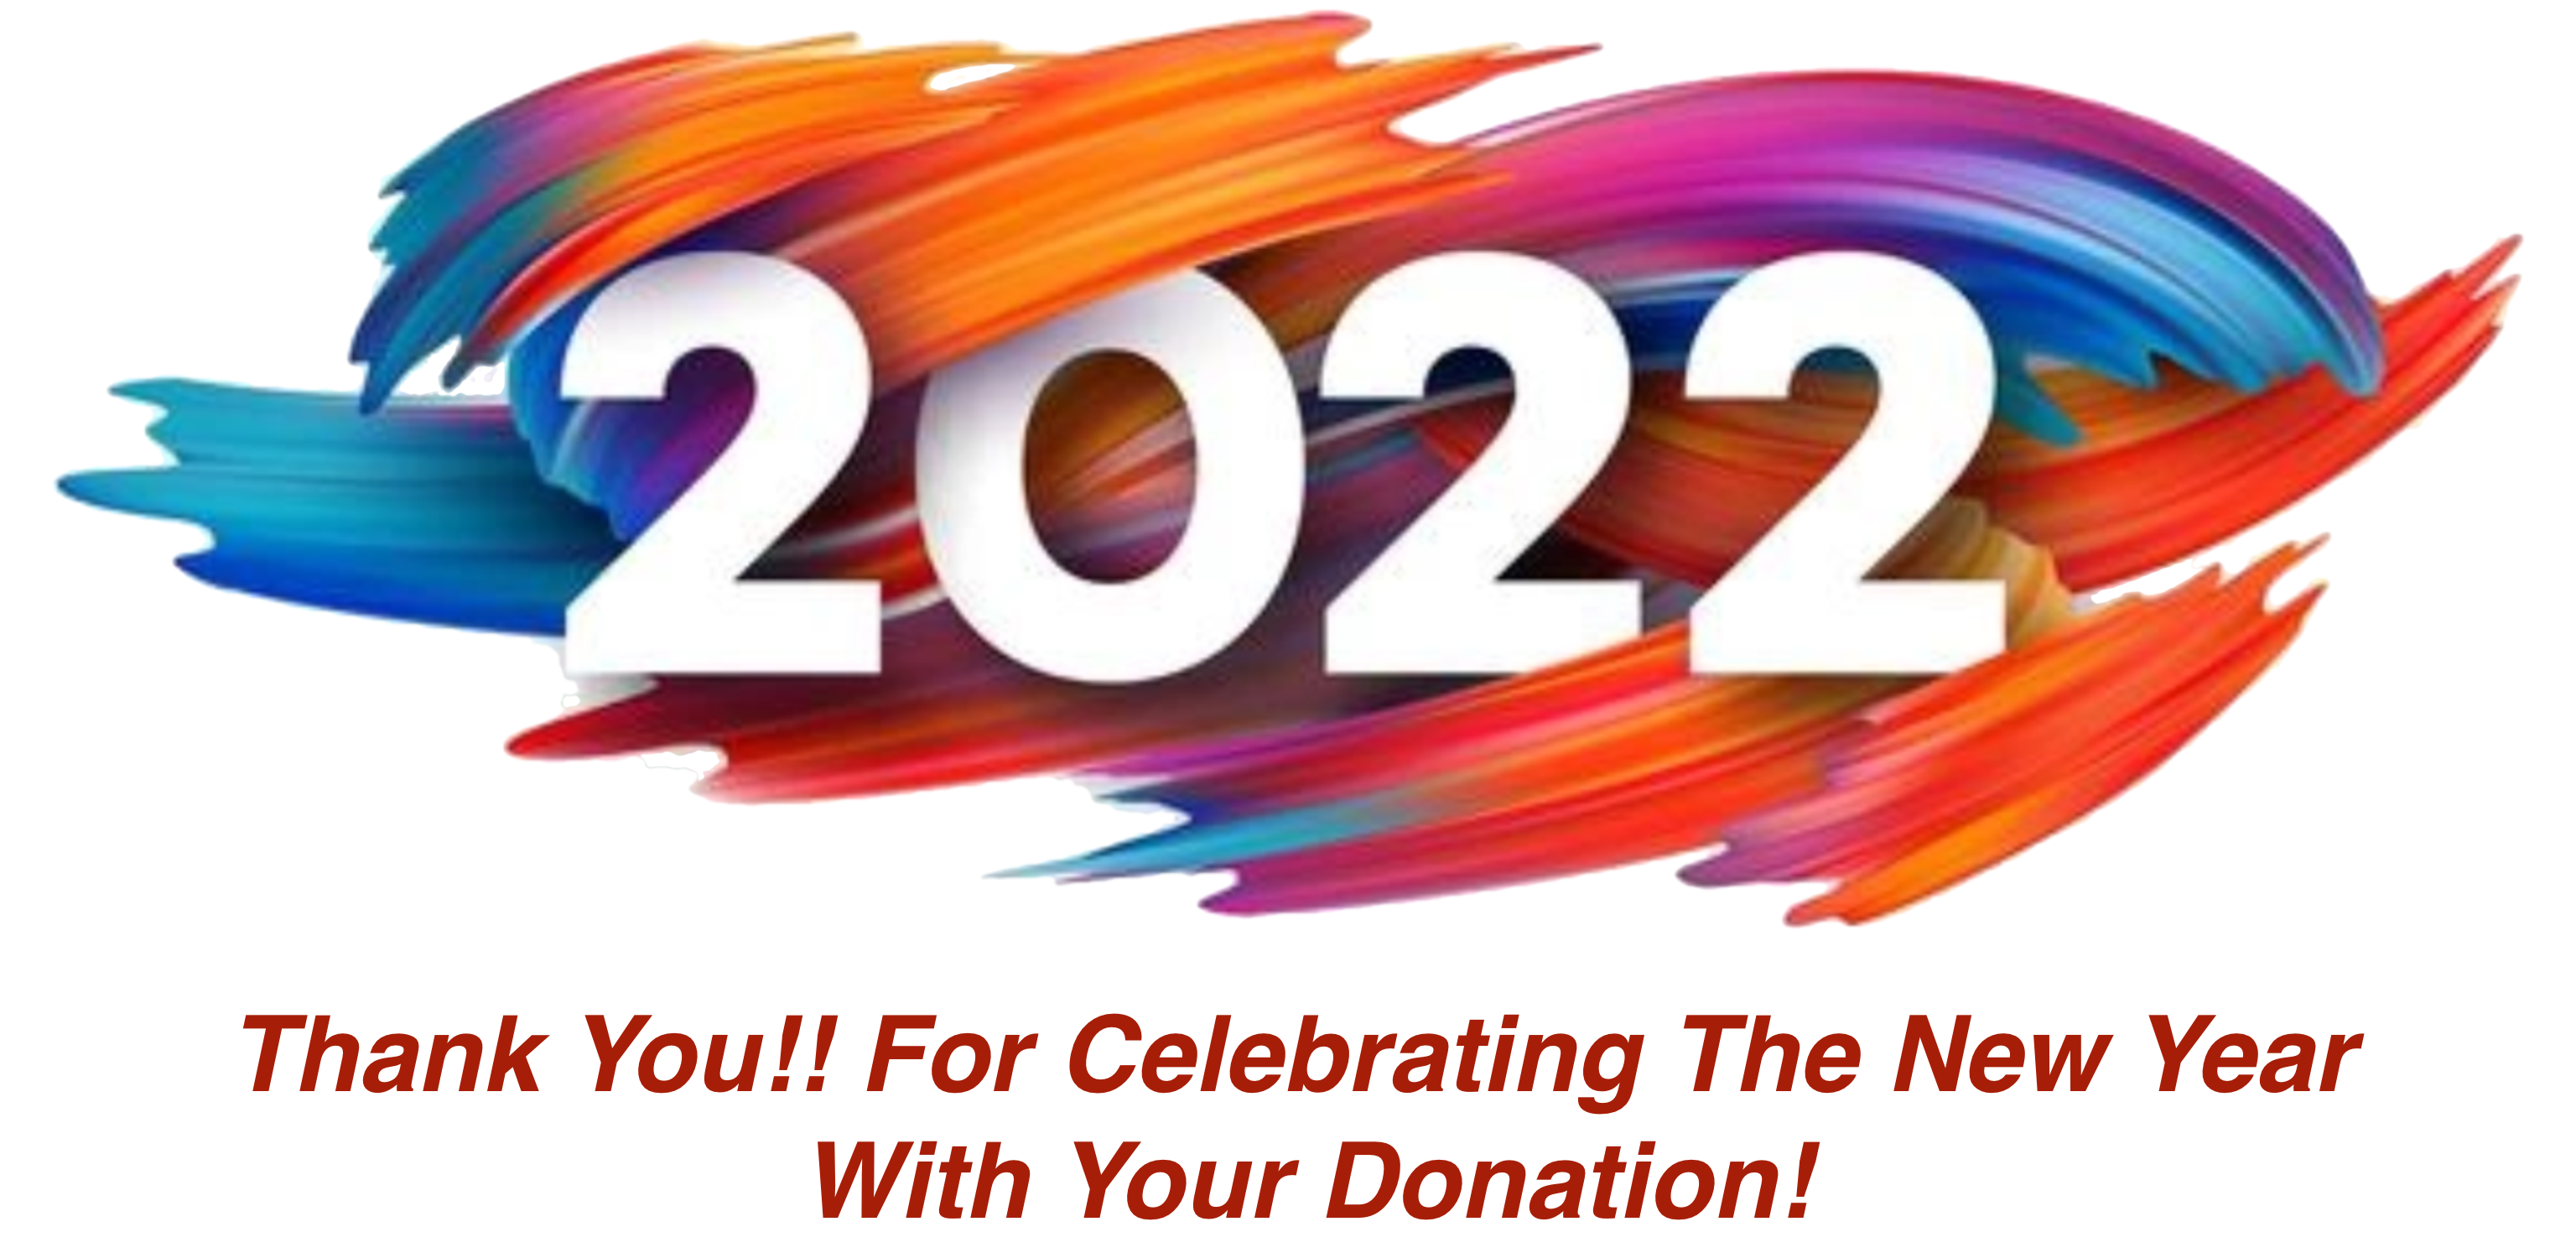 2022 with text